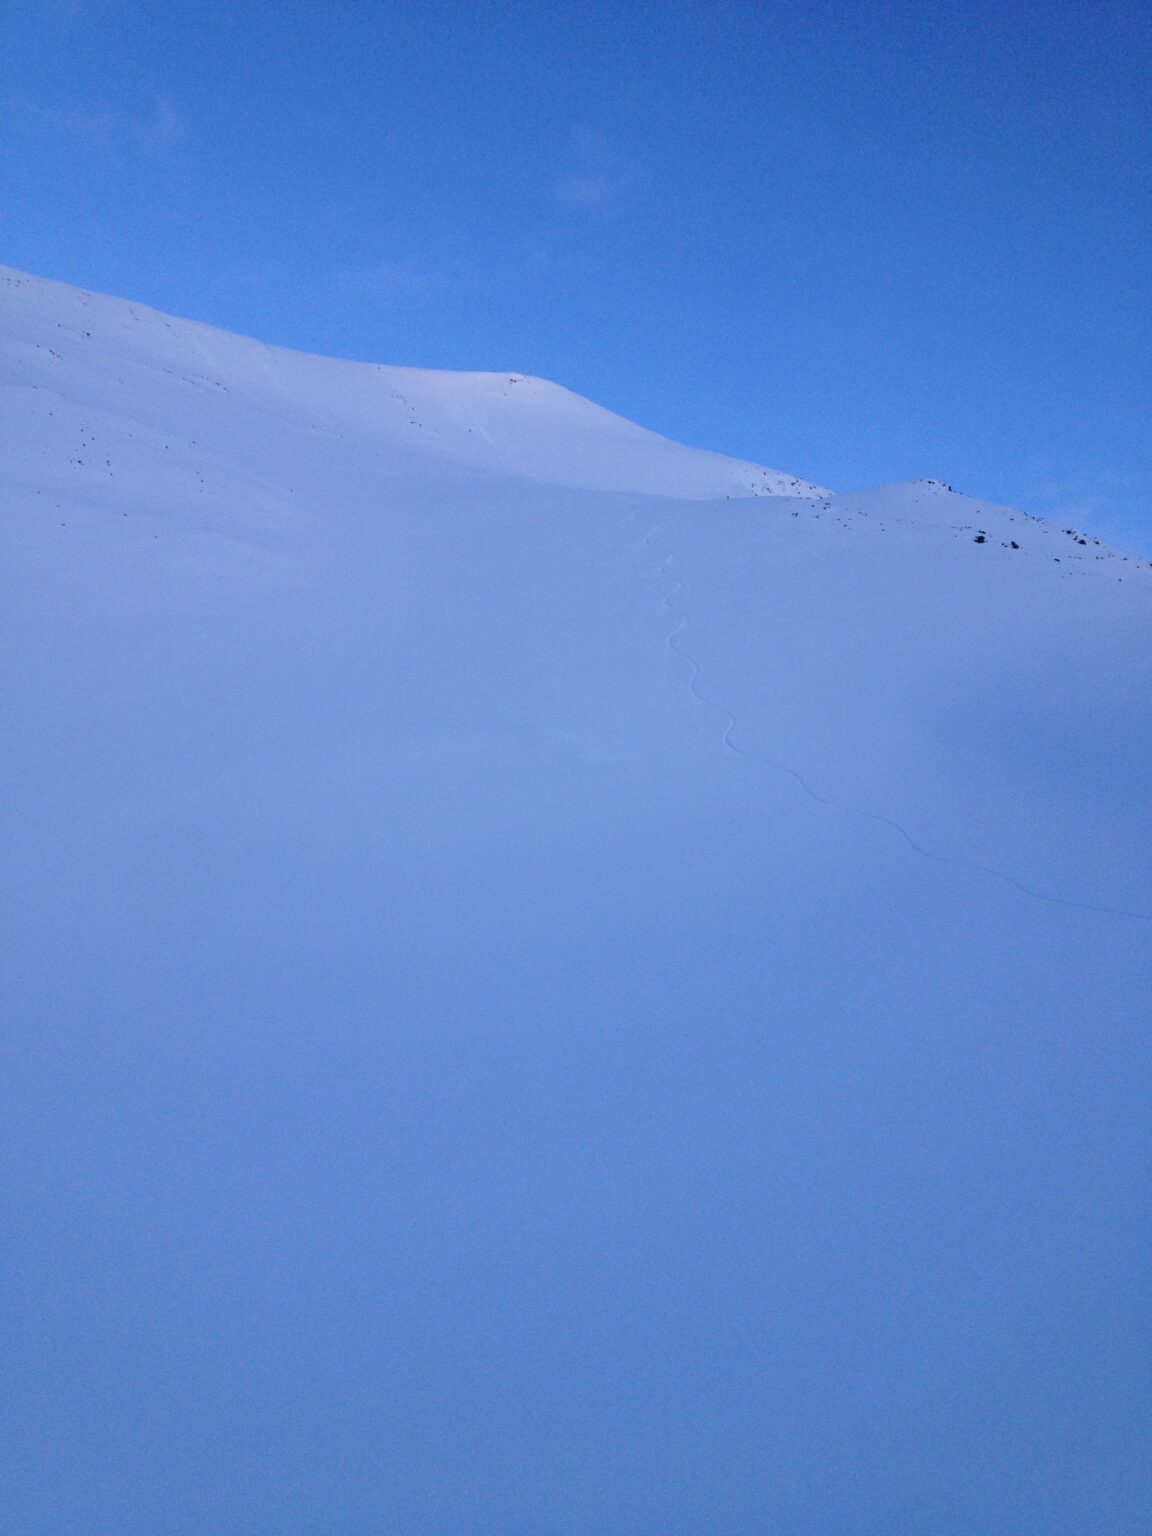 Looking back up at our snowboard tracks off the west face of Rundfjellet